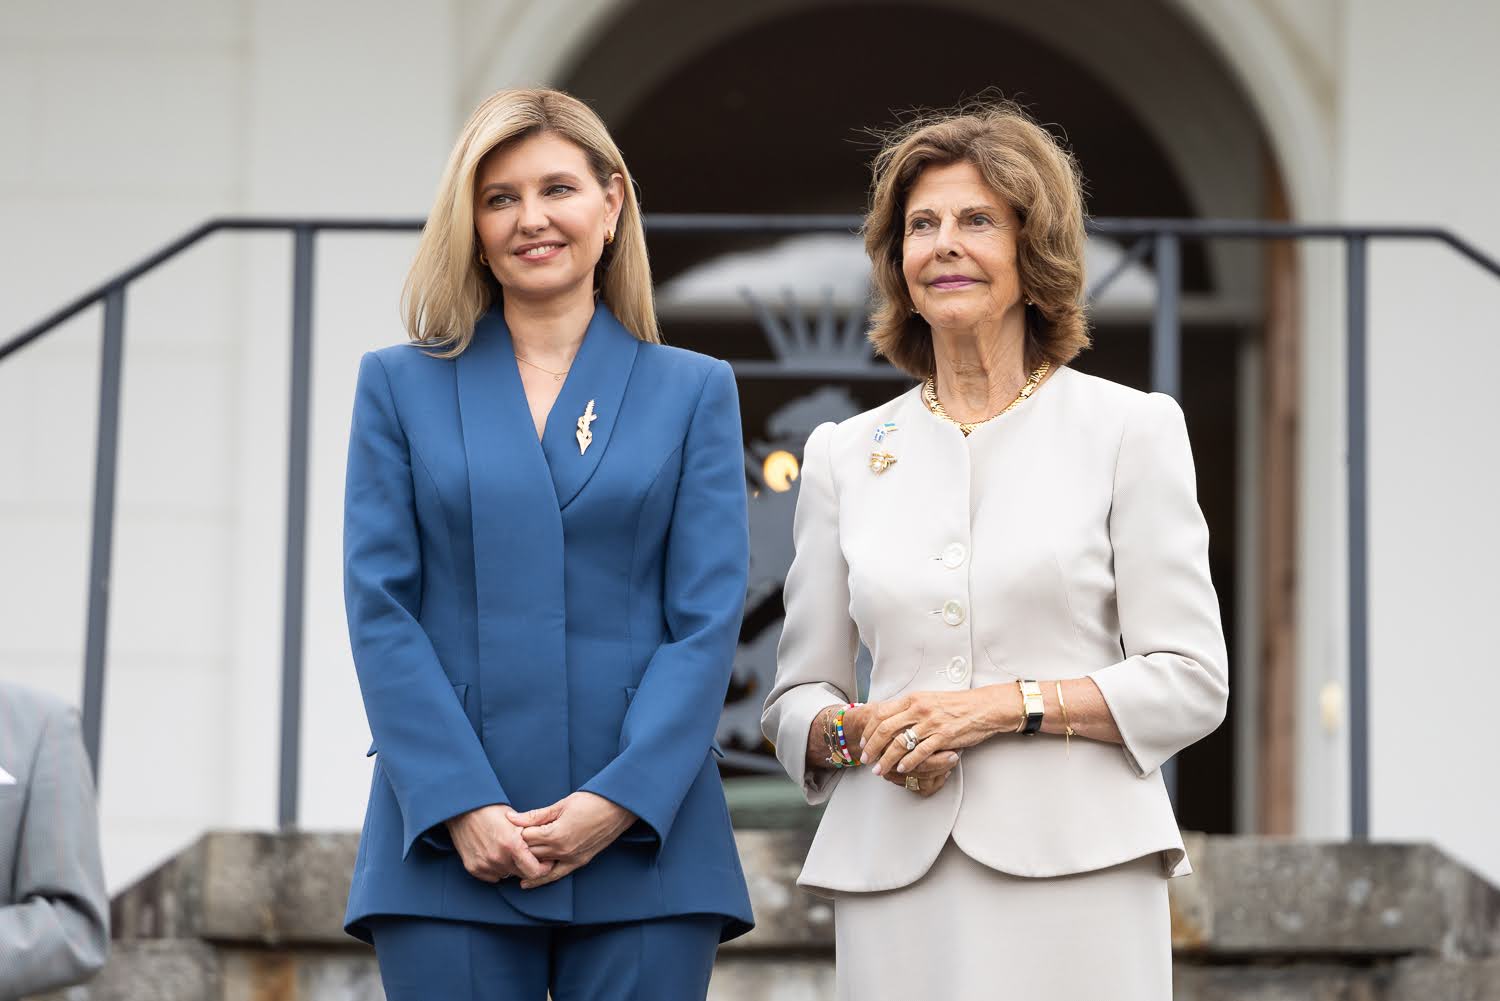 King Carl Gustaf and Queen Silvia took a personal interest in funding the restoration of Zmiivka village's infrastructure, formerly known as Gammalsvenskby, an ancient Swedish settlement.